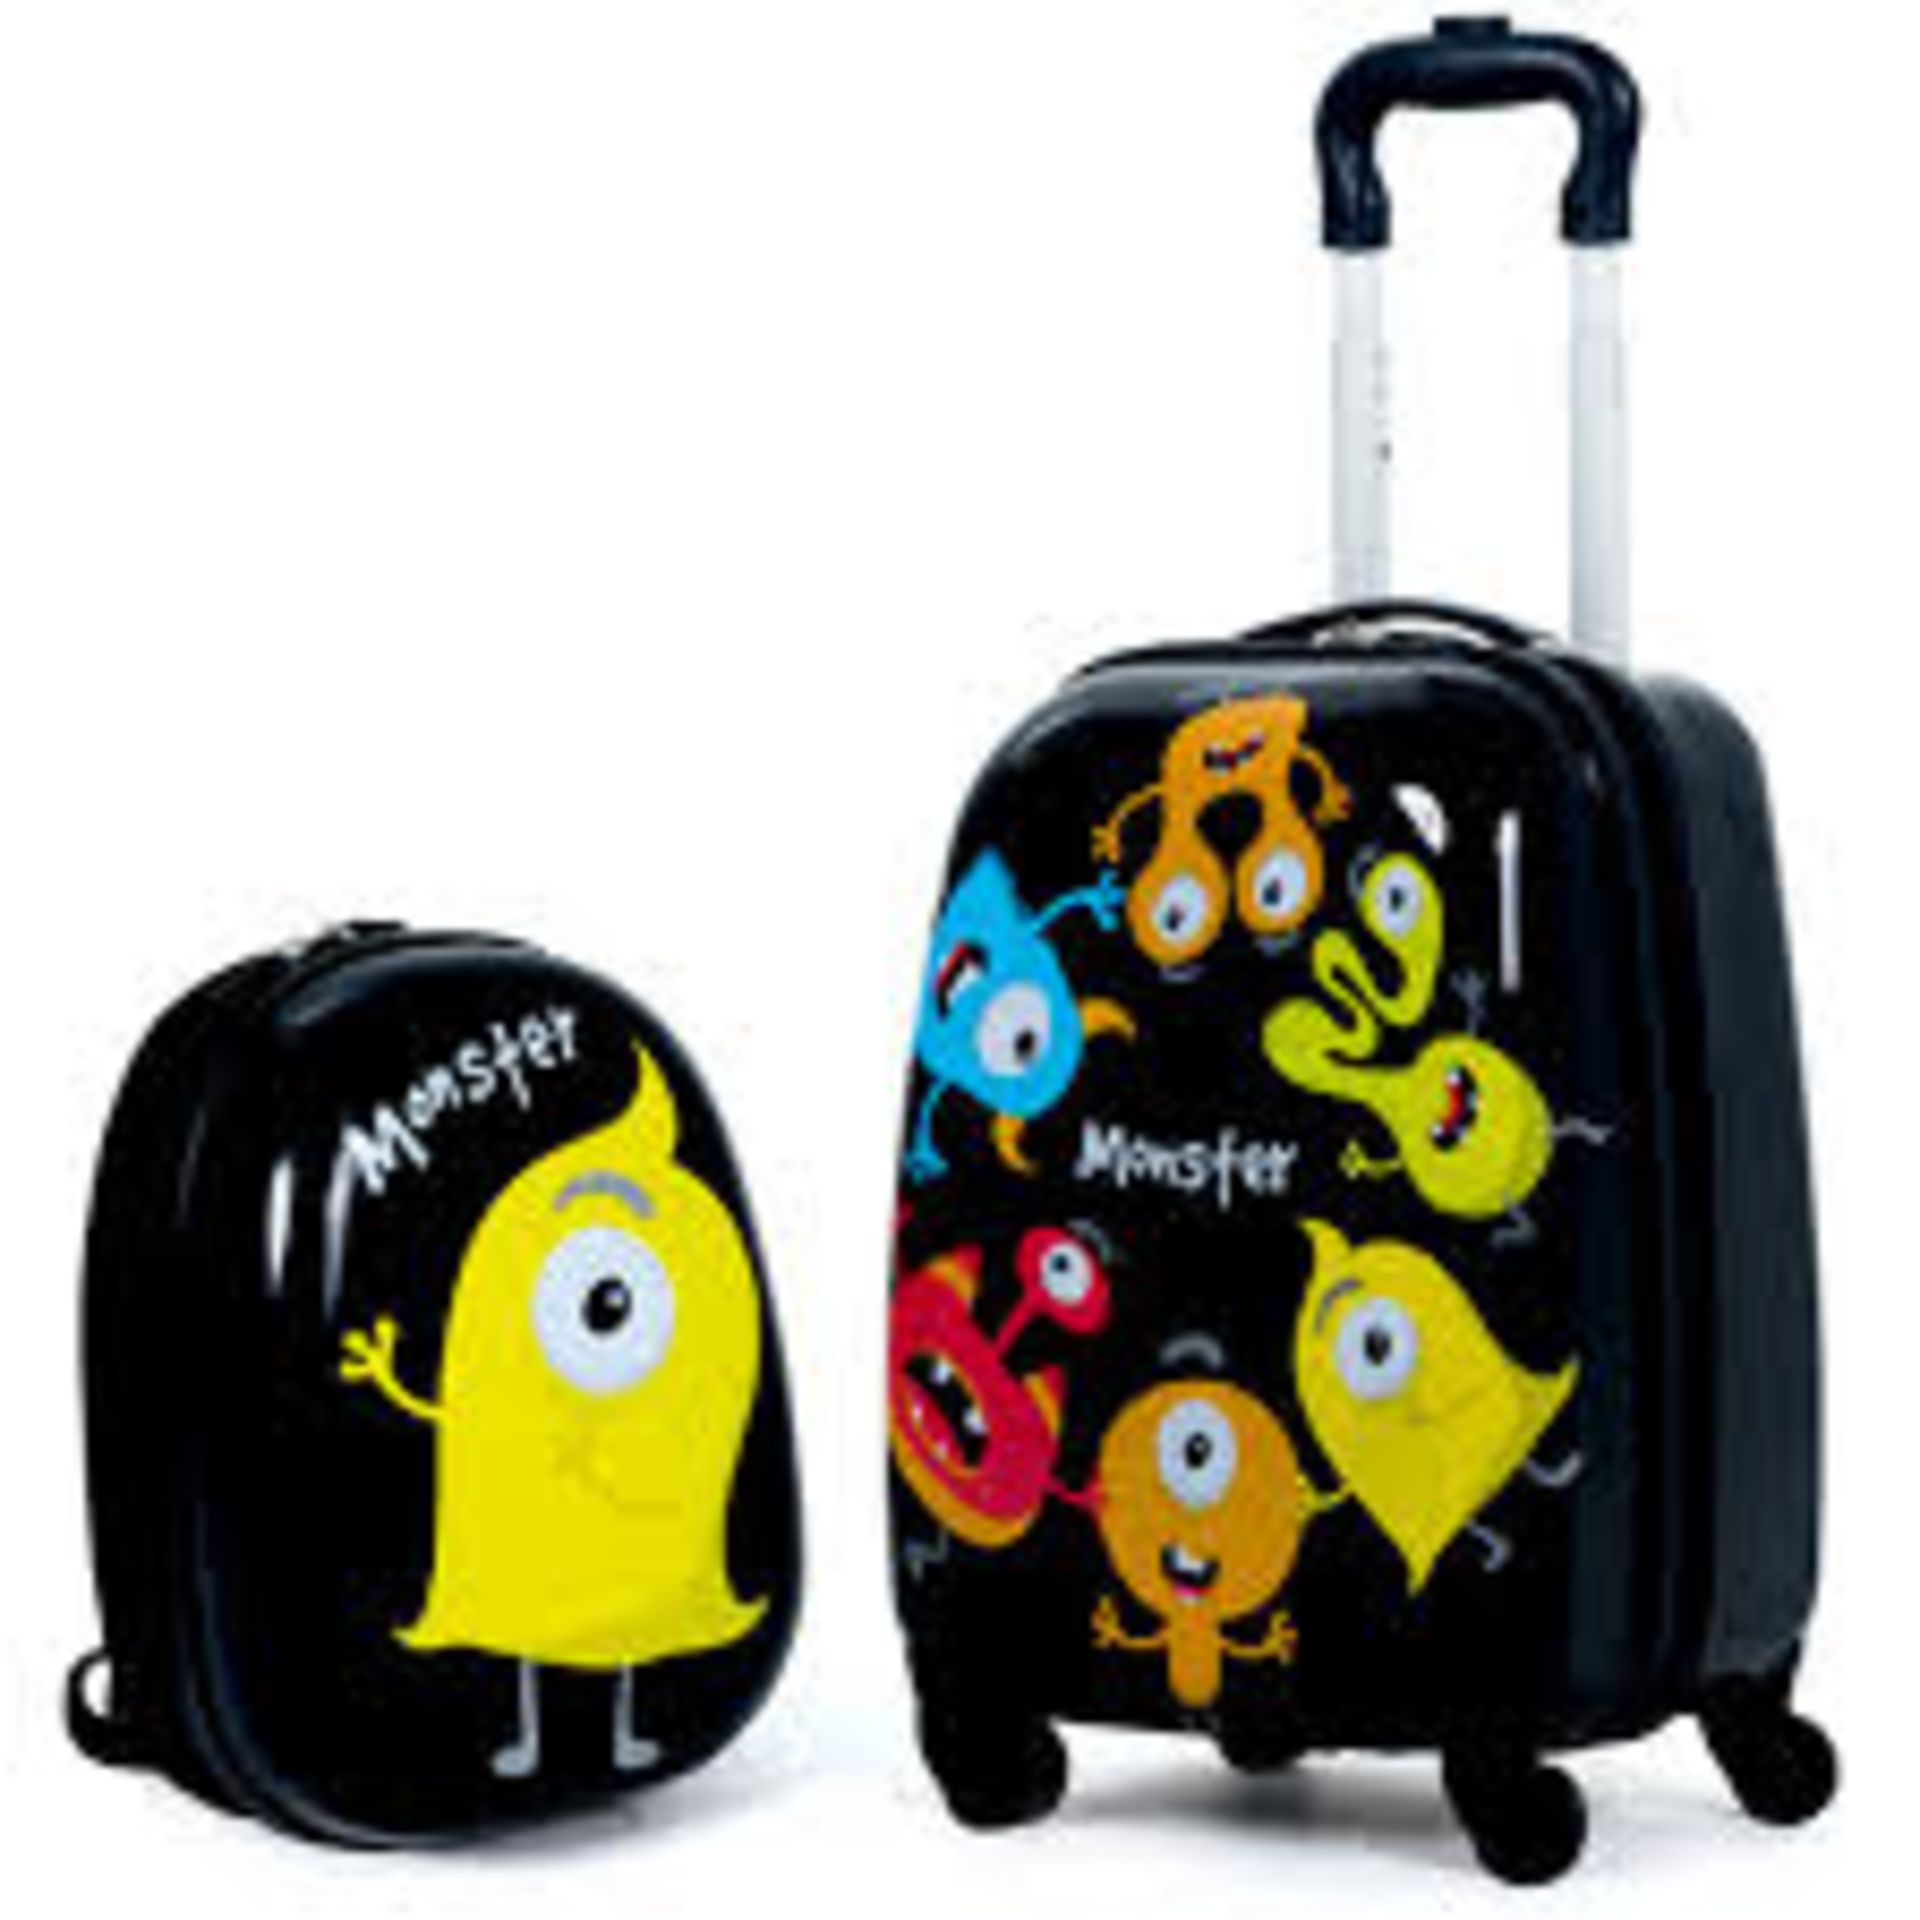 2 Pieces Kids Luggage Set with Carry-on Suitcase and Backpack. -R14.2.